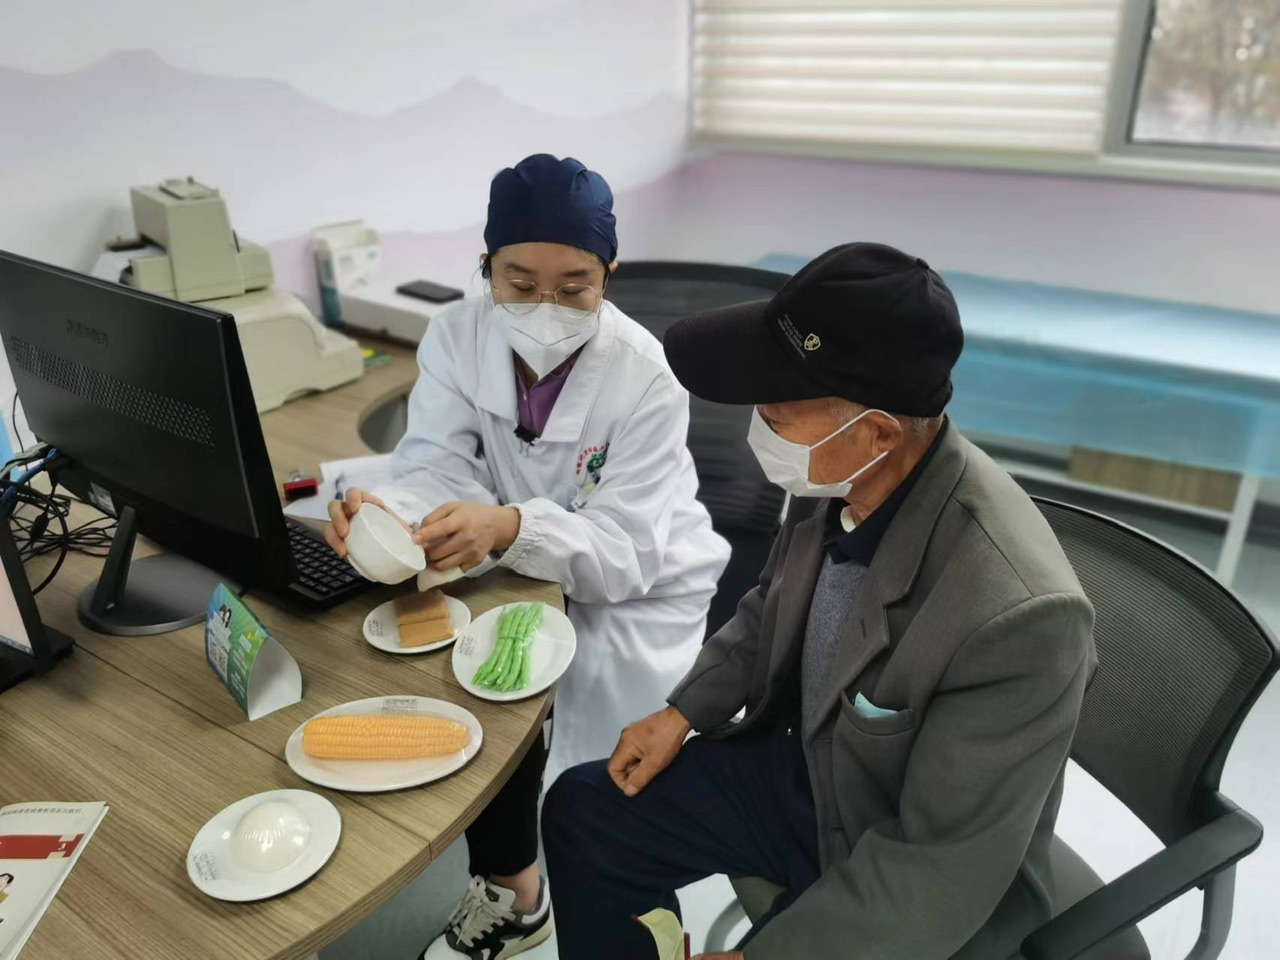 Some family doctors have also opened a special clinic for diabetes... 60% of residents in this district of Shanghai are diagnosed and treated in Fengxian | residents | community